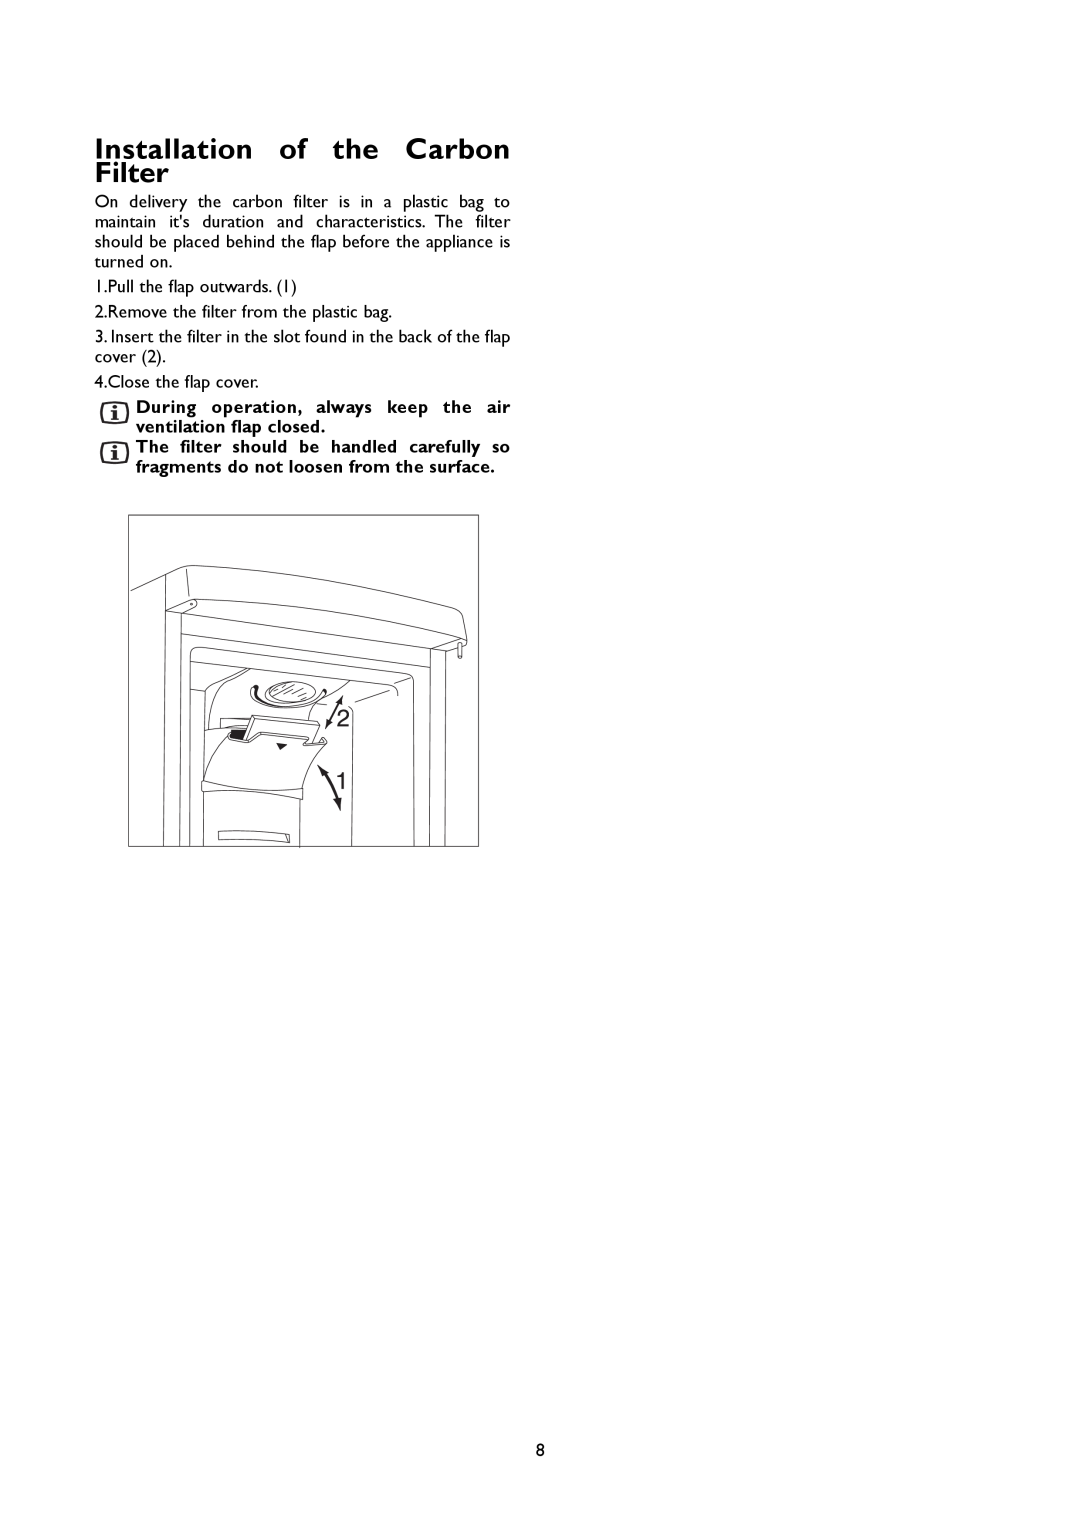 John Lewis JLFFW2005 instruction manual Installation of the Carbon Filter 